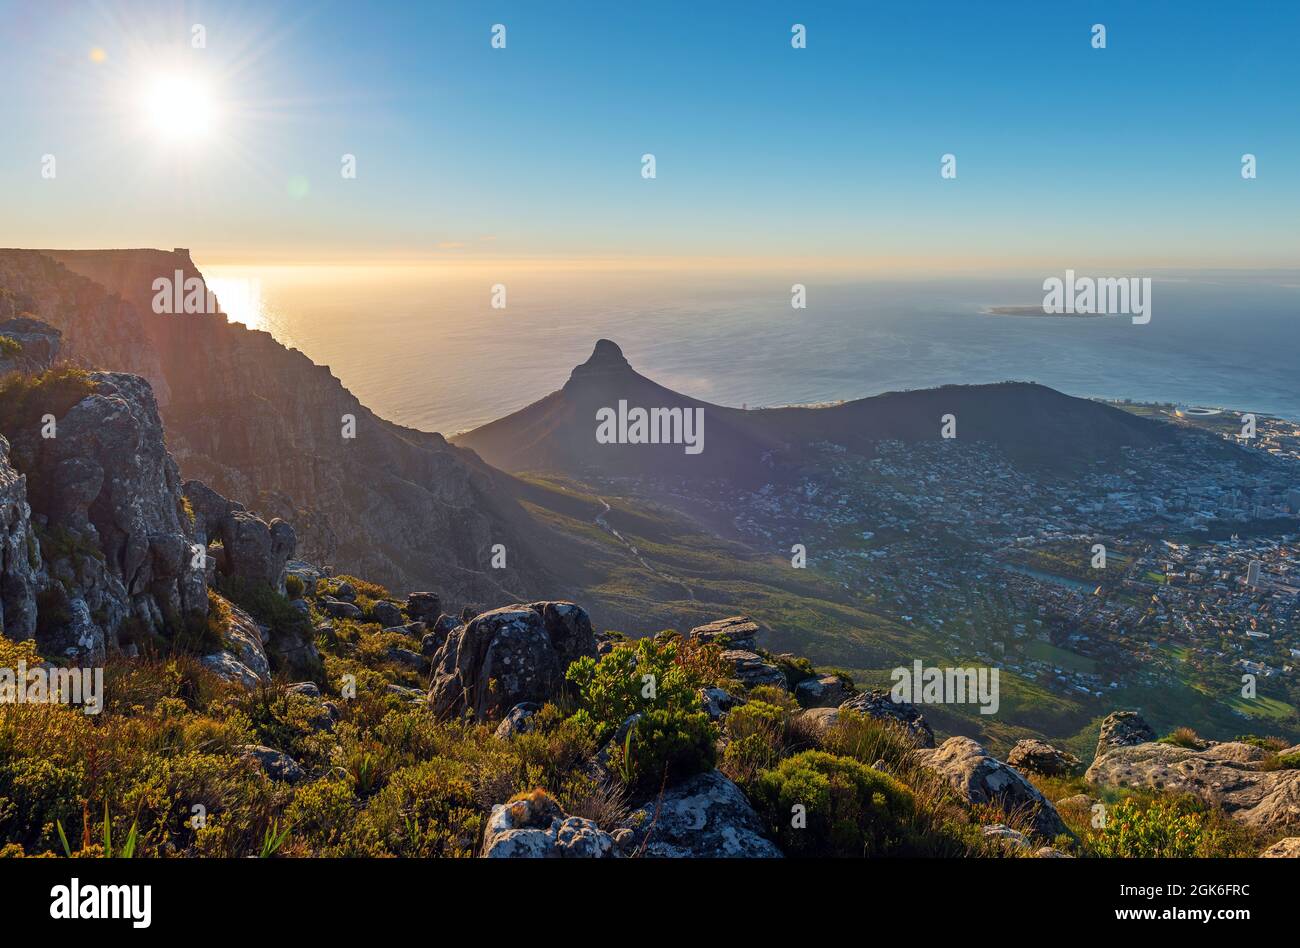 Cape Town skyline and Lion's Head peak at sunset seen from Table Mountain national park, Cape Town, South Africa. Stock Photo